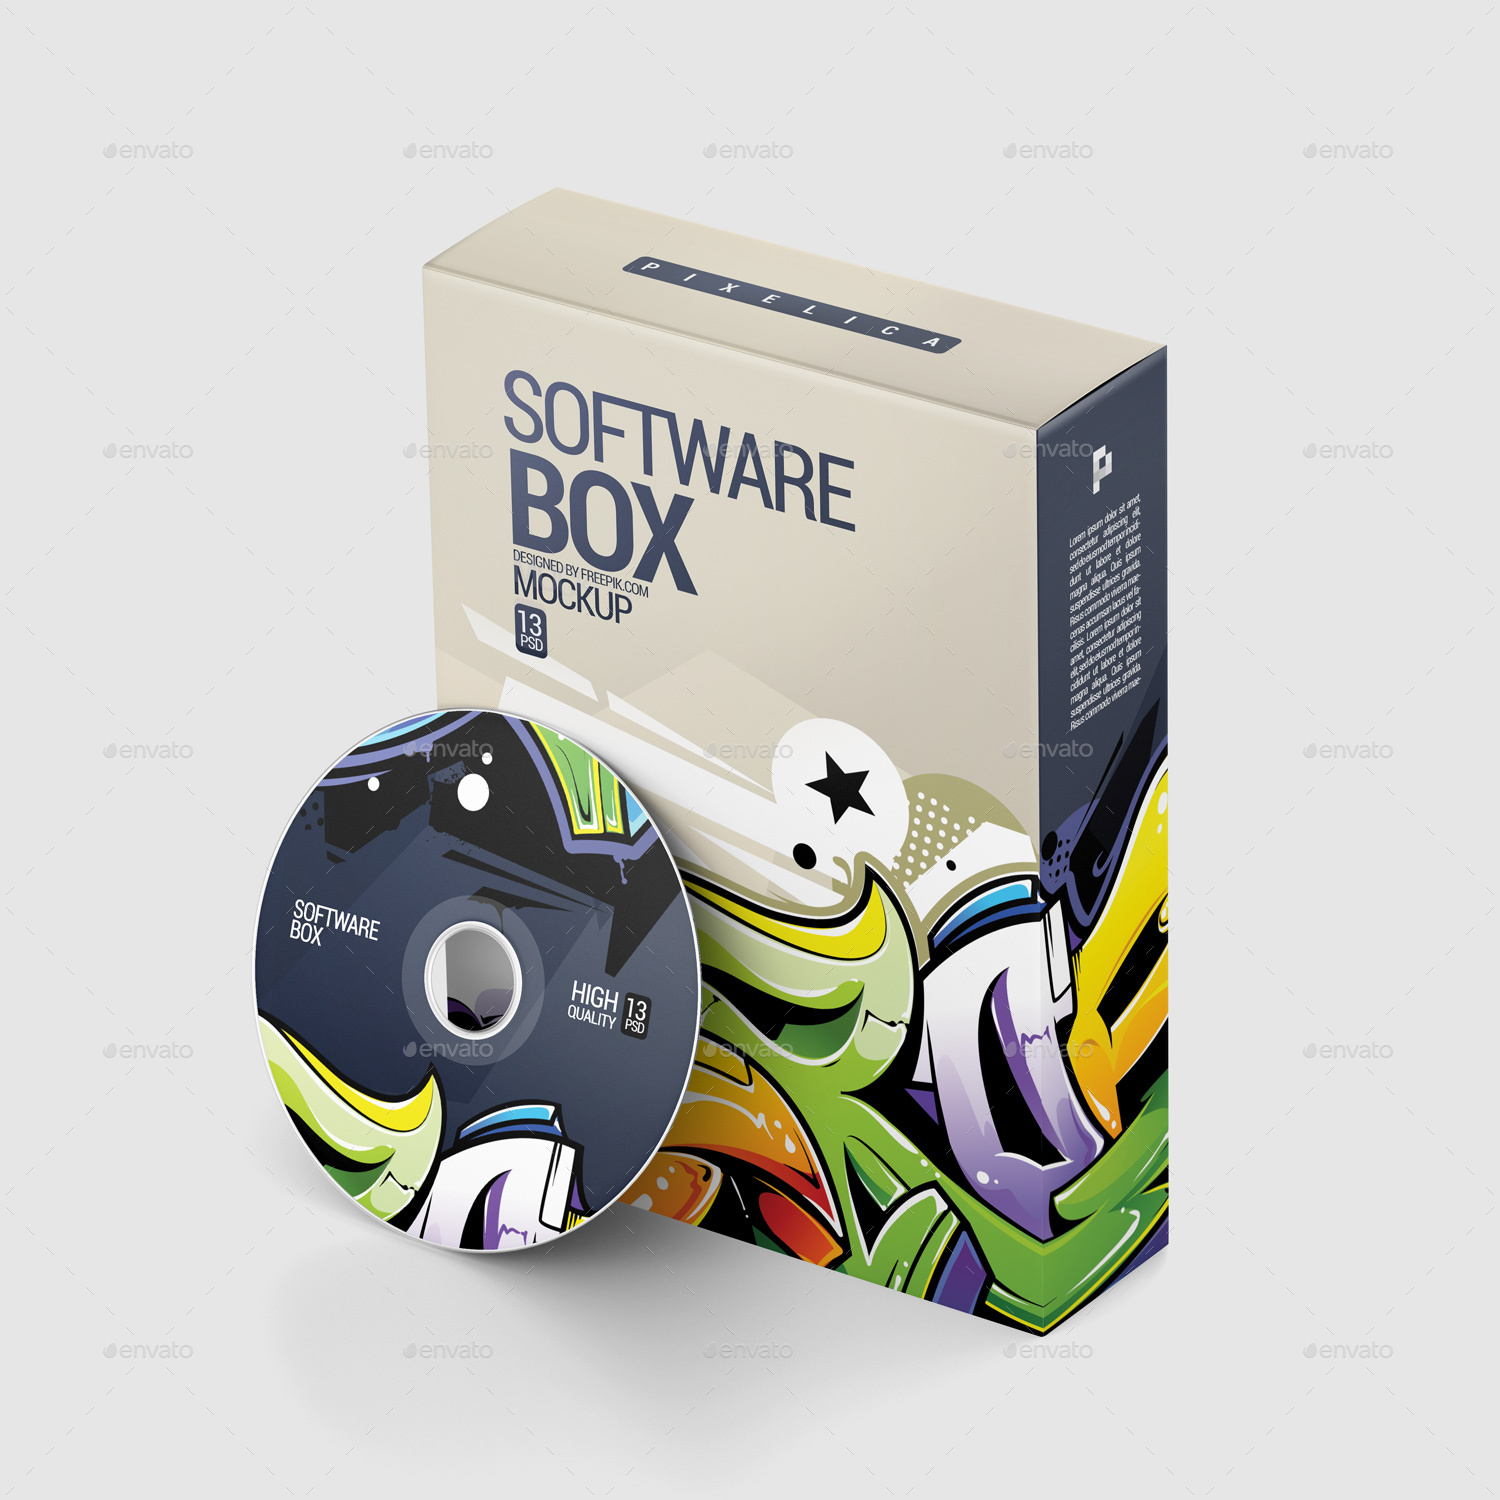 Download Software Box Mockup By Pixelica21 Graphicriver